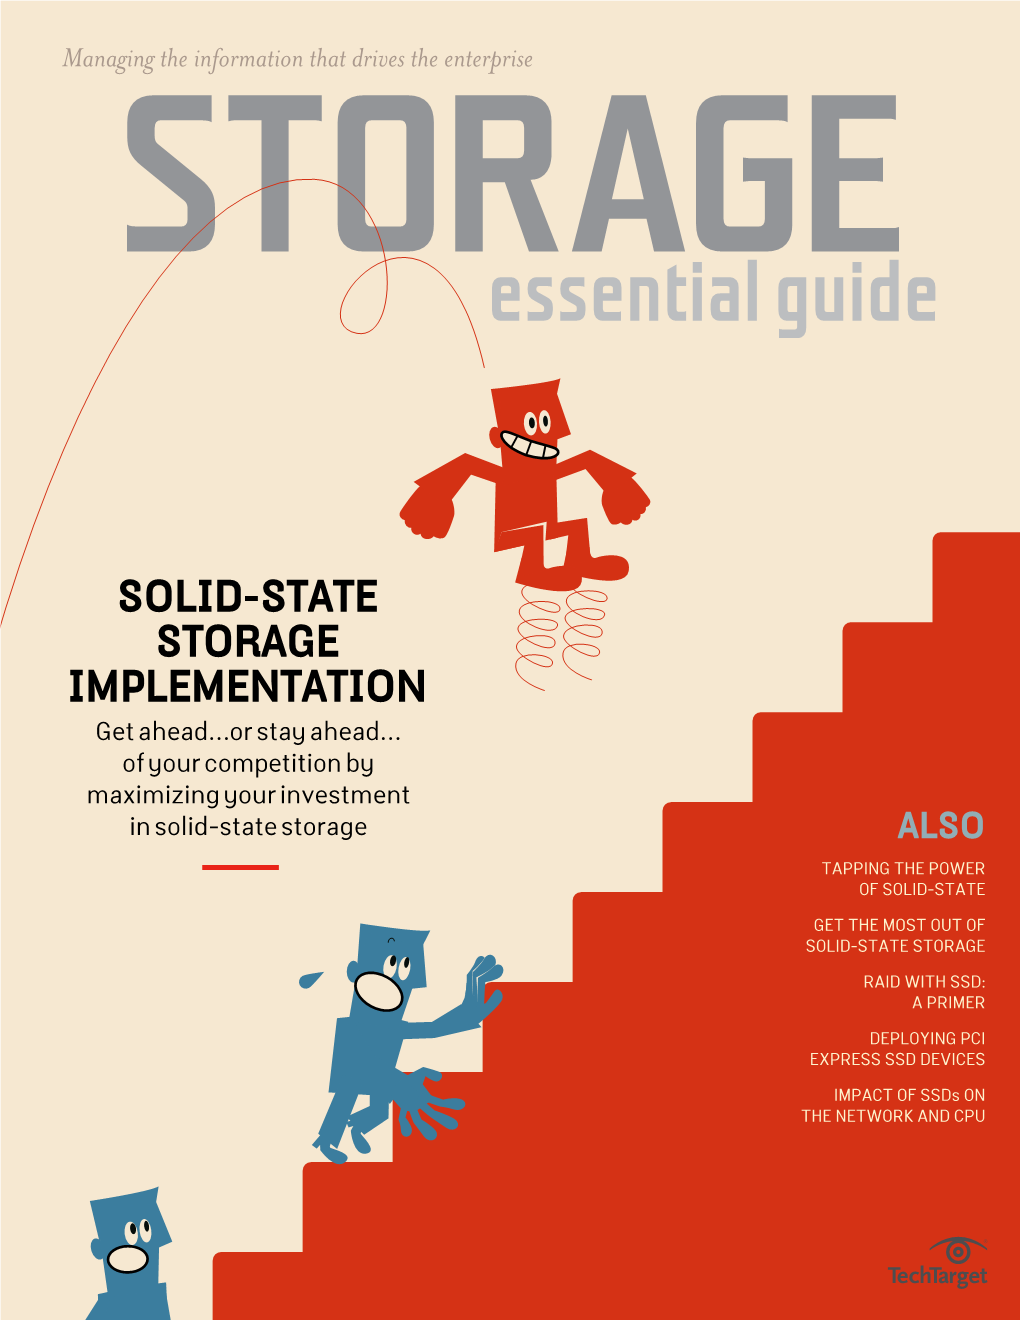 Essential Guide on Solid-State Storage Implementation Budget